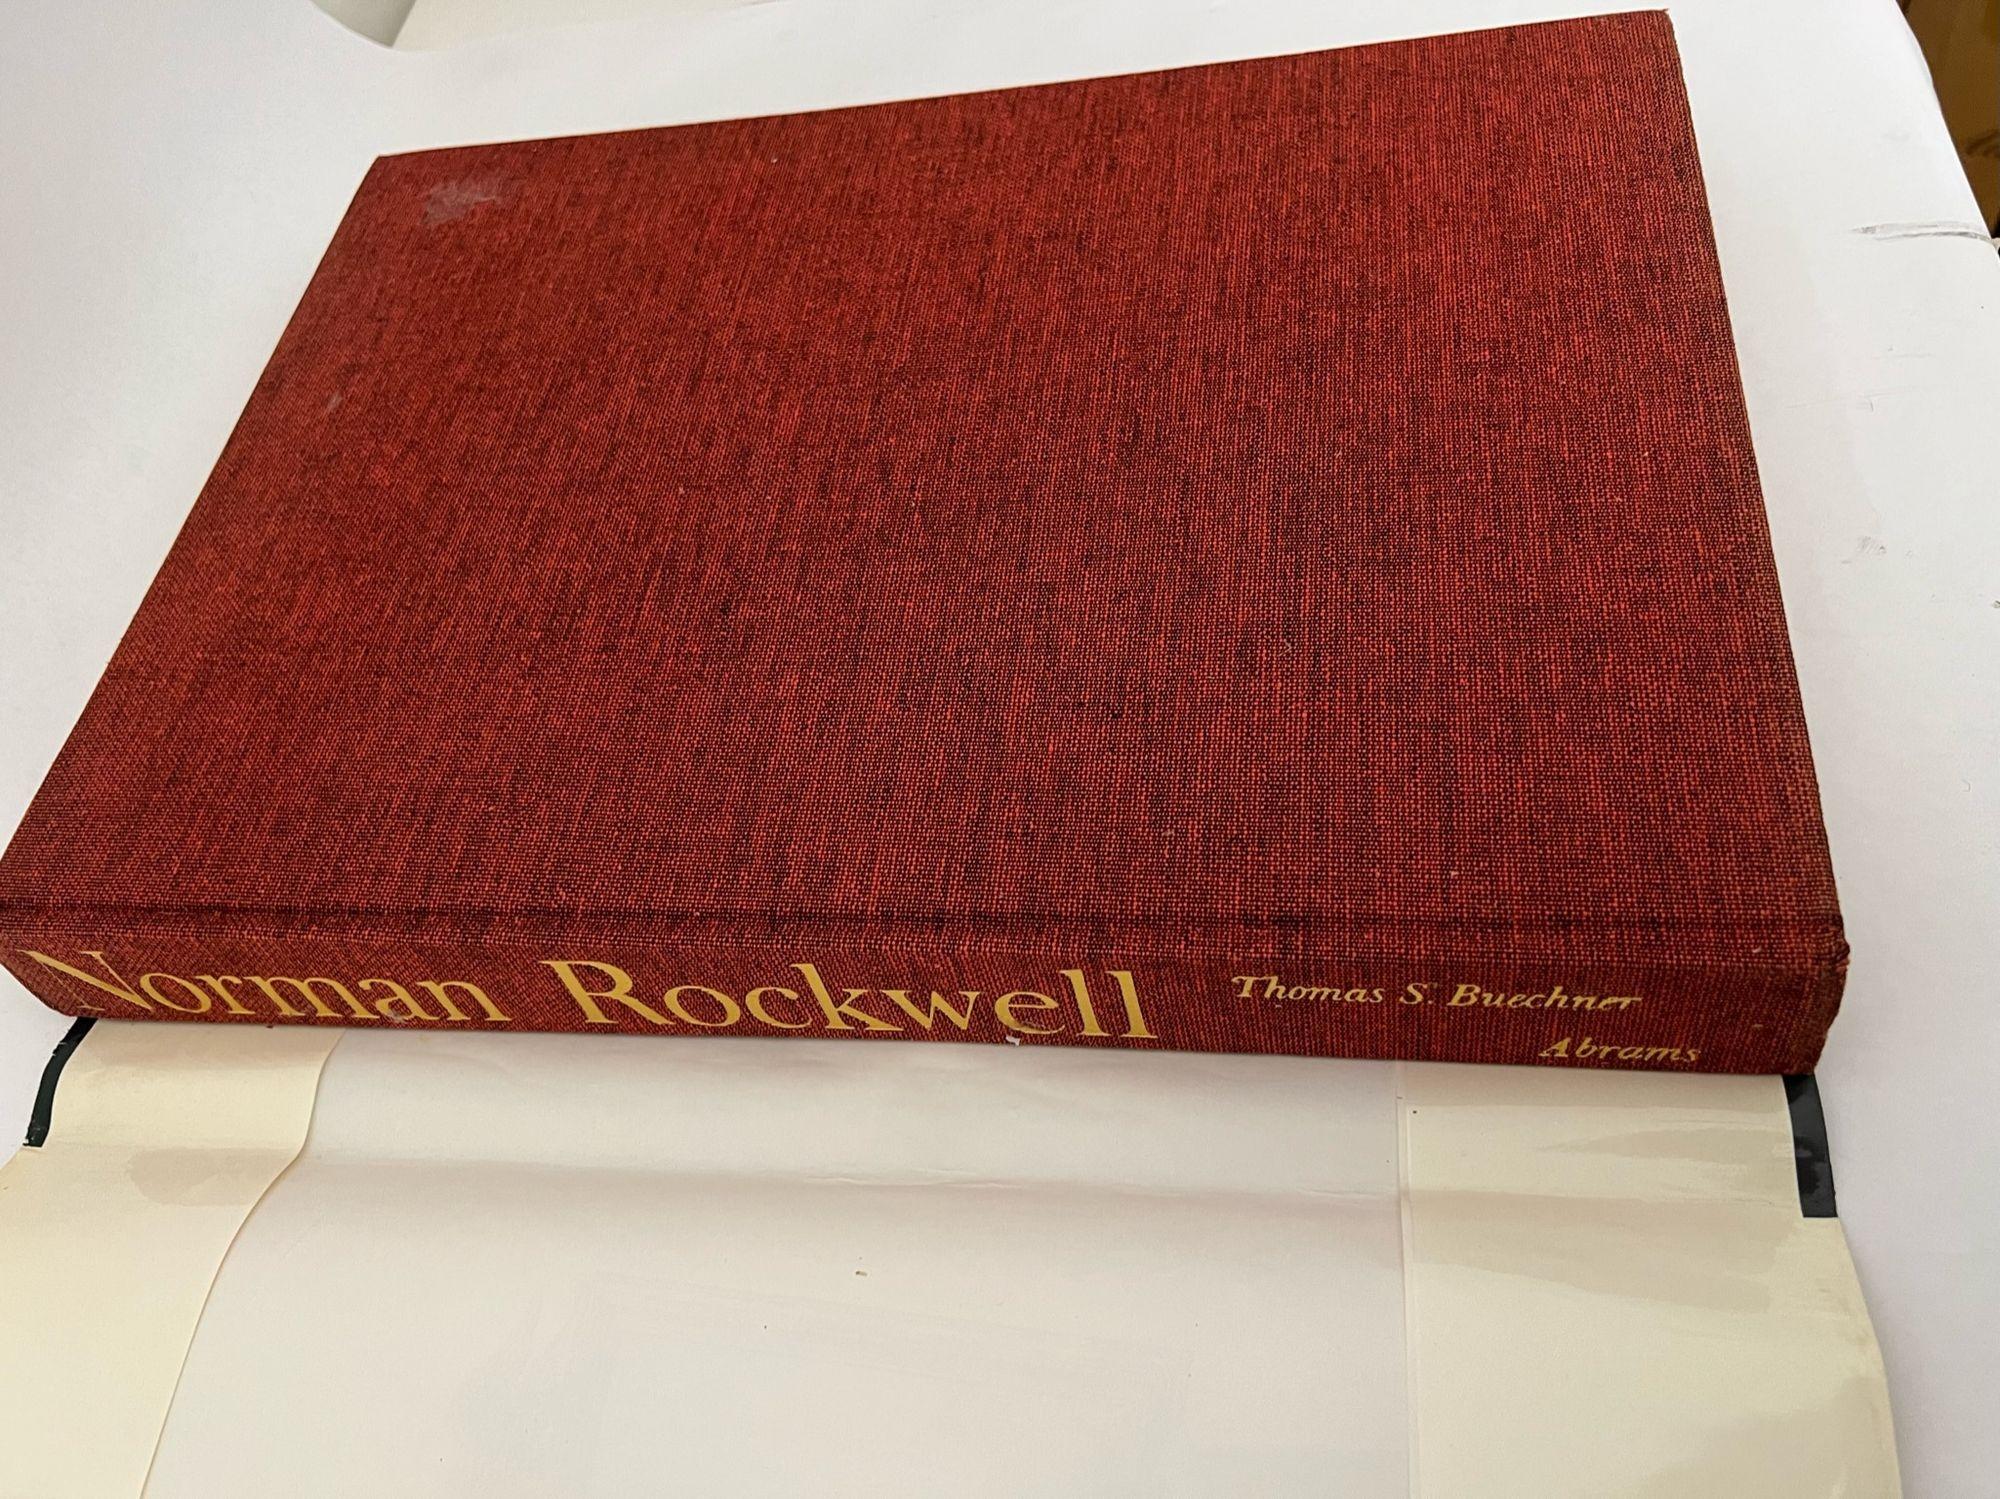 1970 Norman Rockwell: Artist and Illustrator Oversized Heavy Book For Sale 5